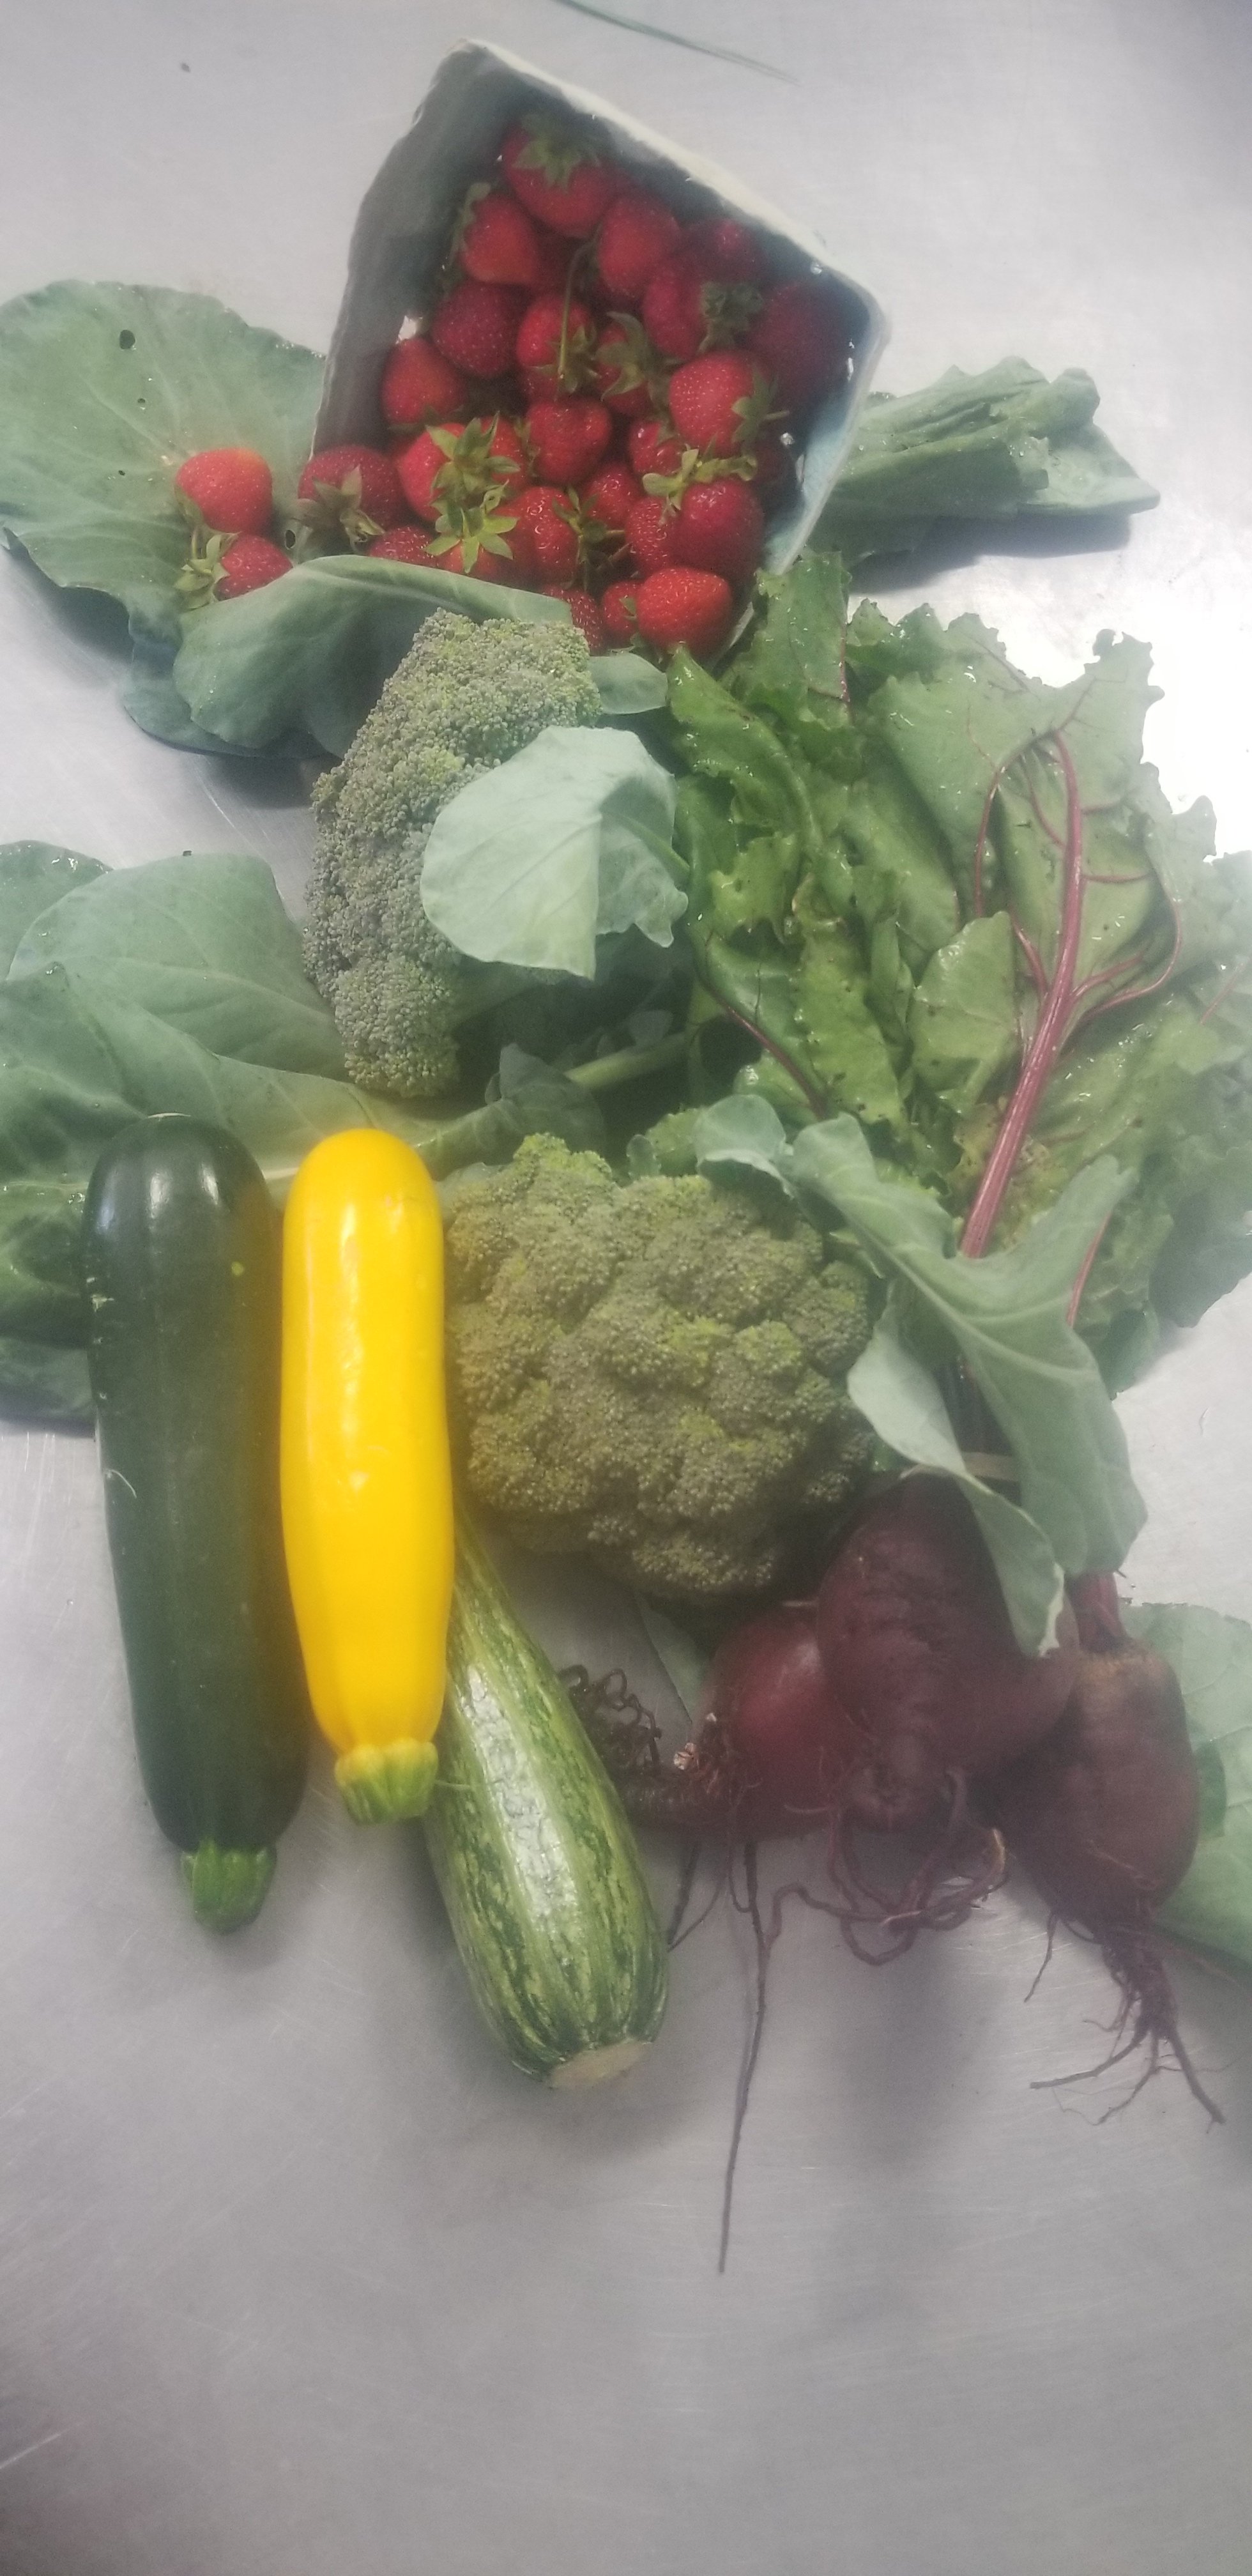 Farm Happenings for the week of July 9, 2019